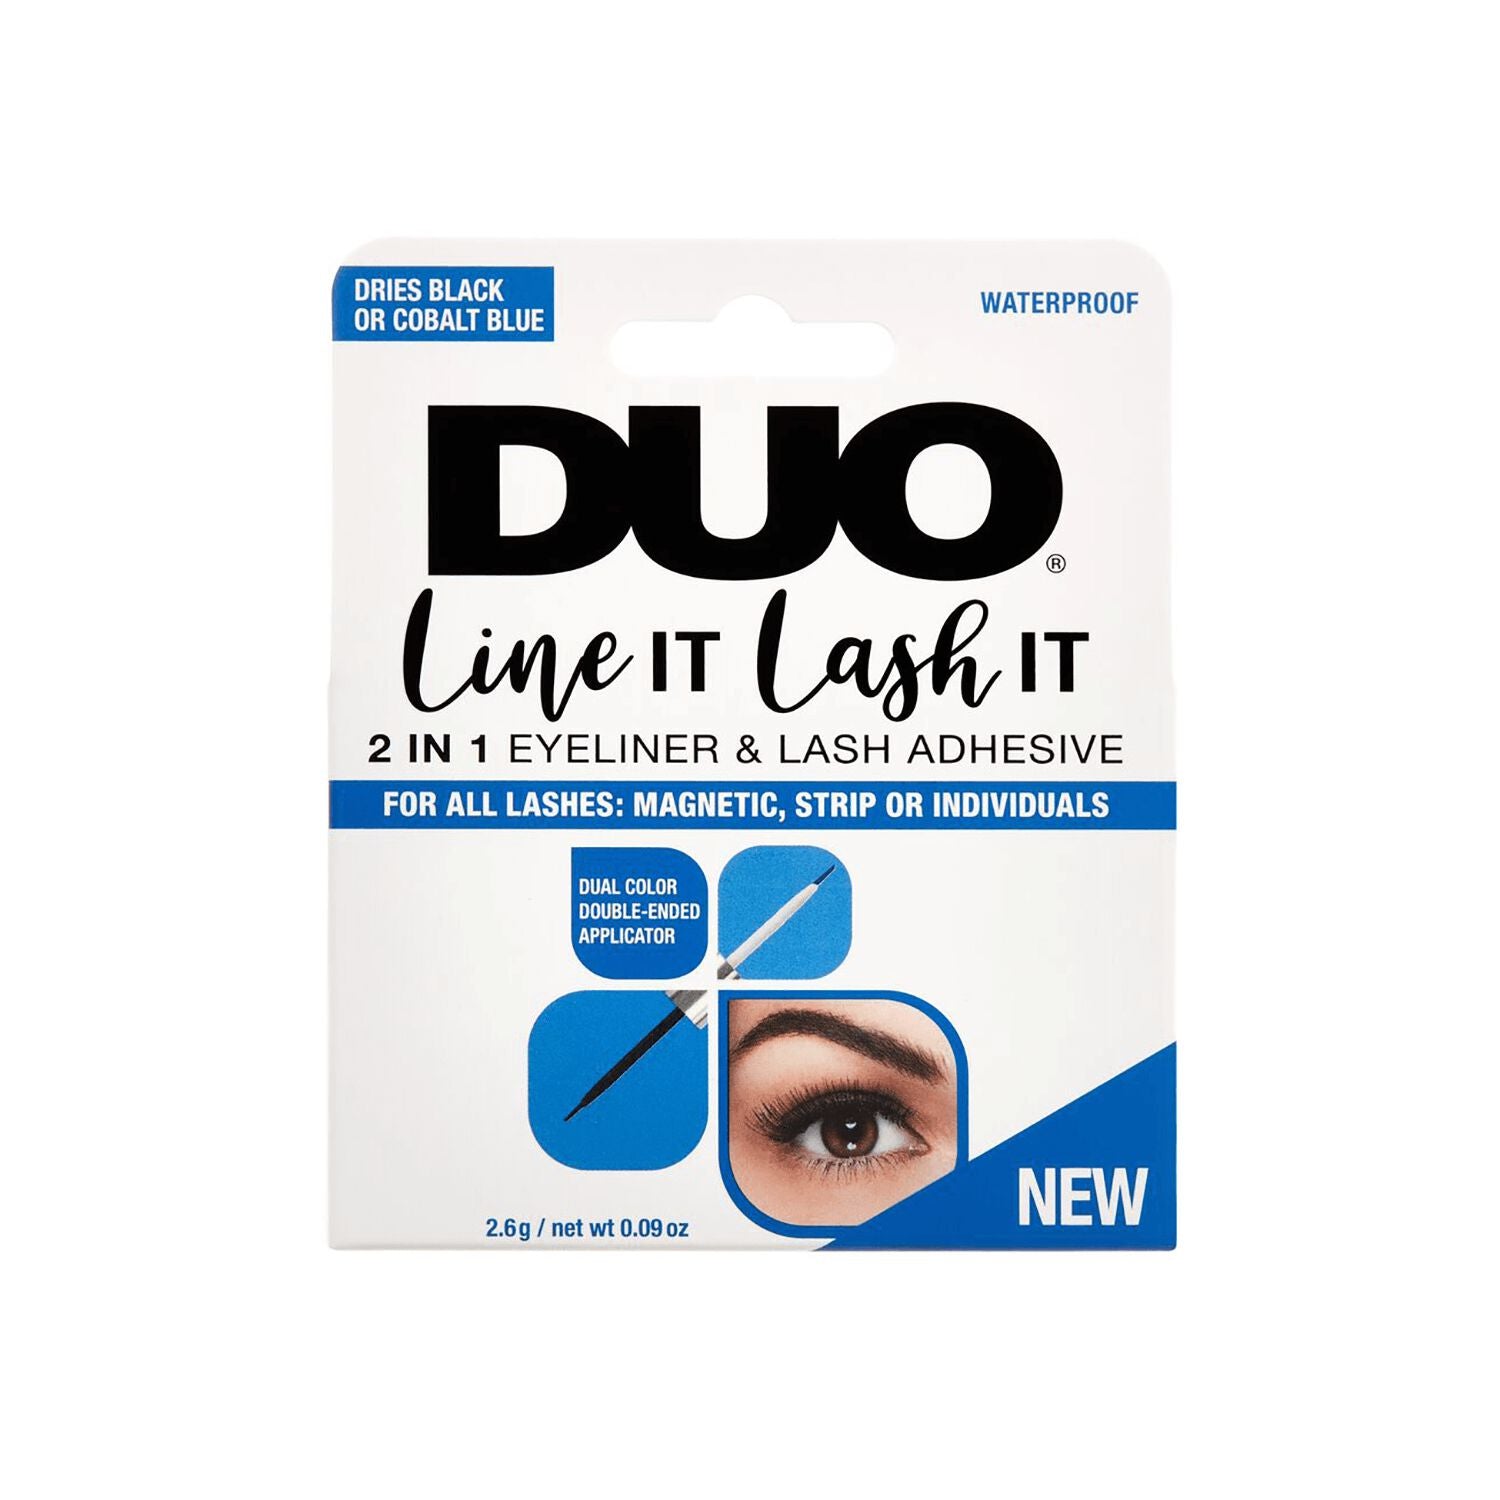 Lash Glue and Remover  by   Ardell DUO Dual Line It Lash It Black & Cobalt